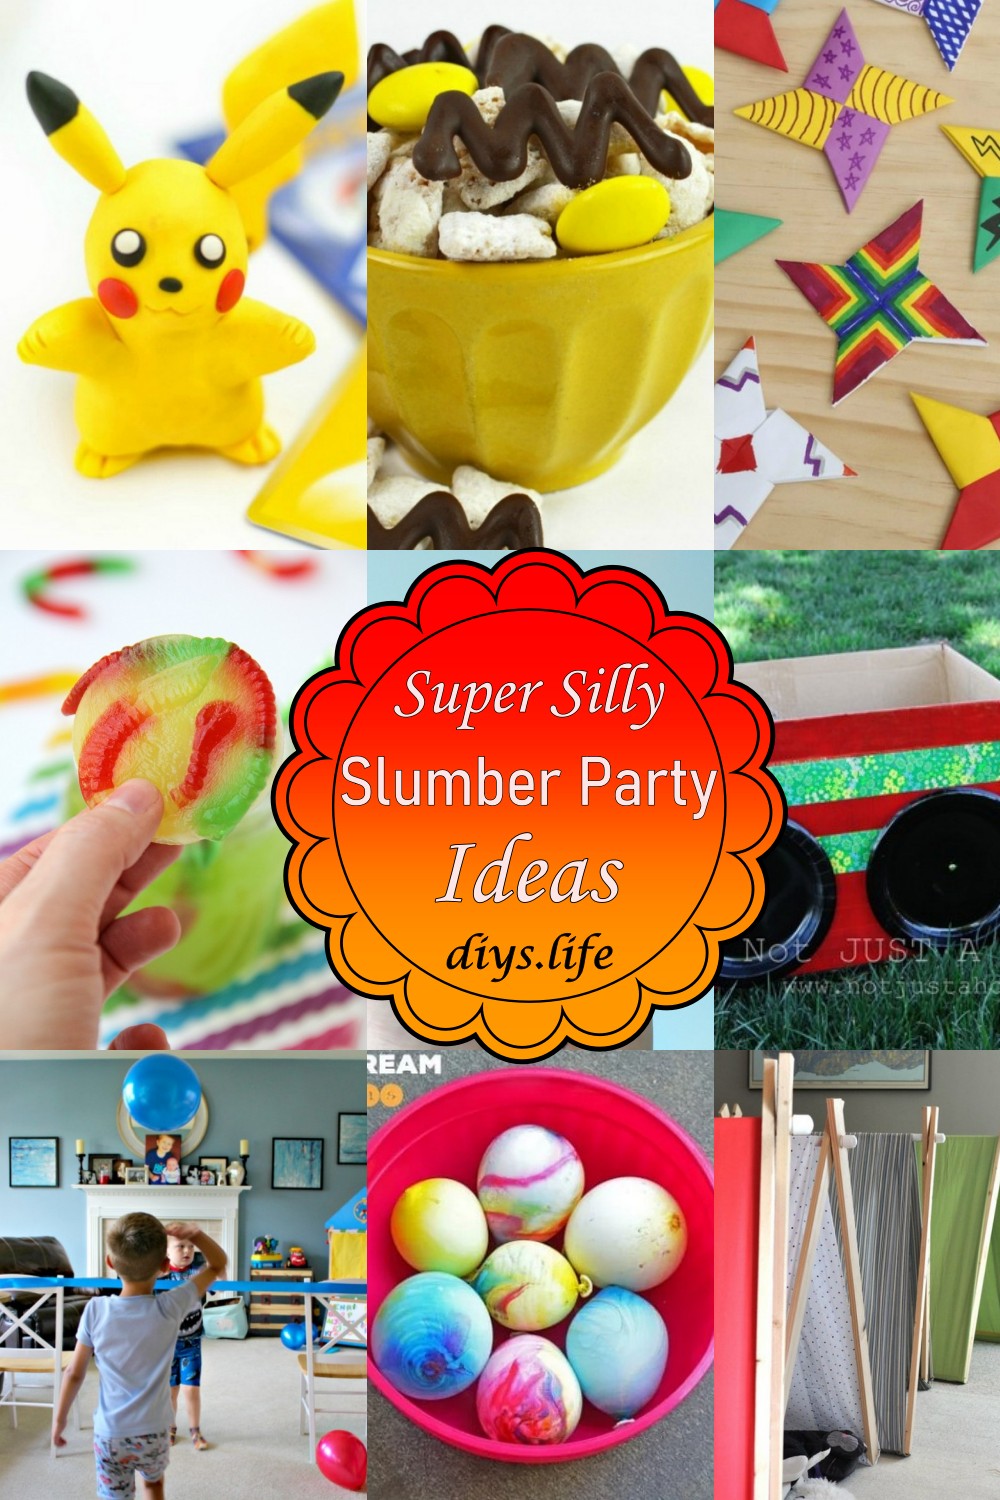 Super Silly Slumber Party Ideas